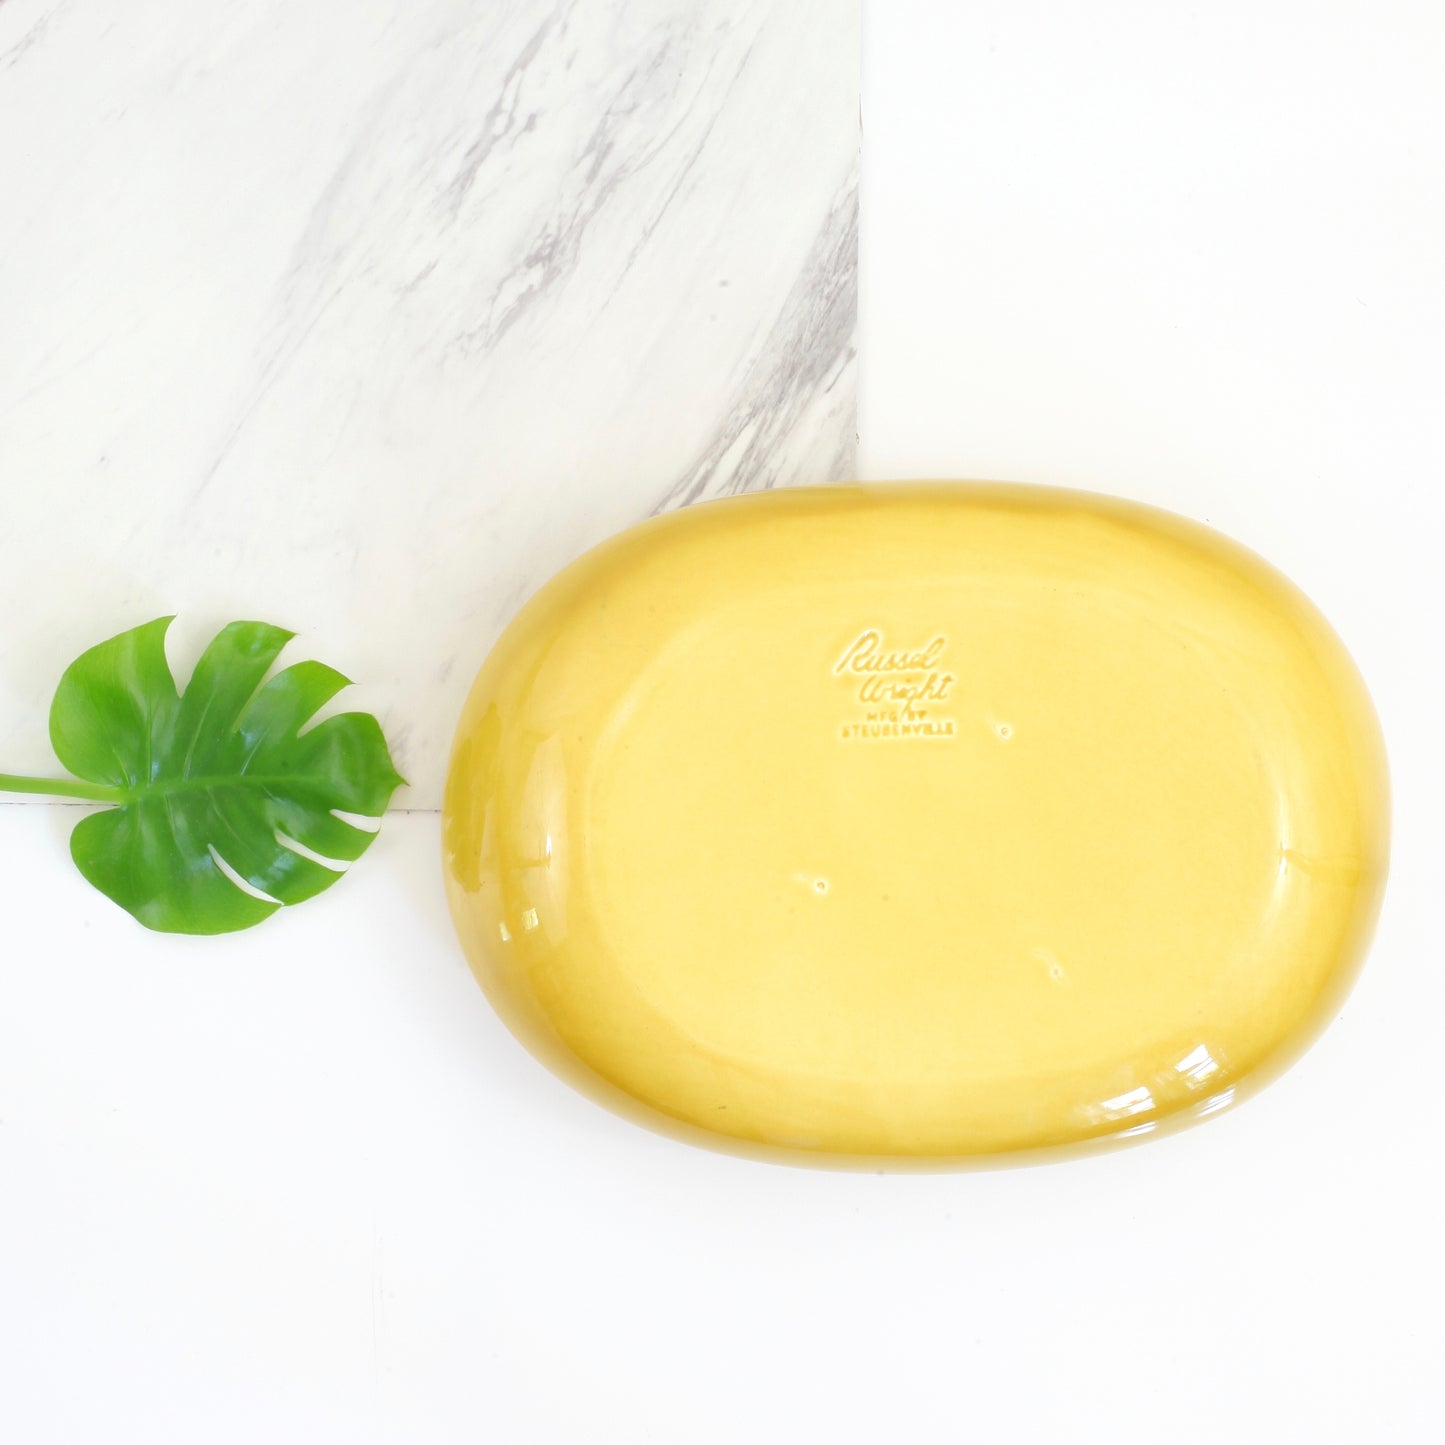 SOLD - Vintage Russel Wright Chartreuse American Modern Serving Bowl by Steubenville